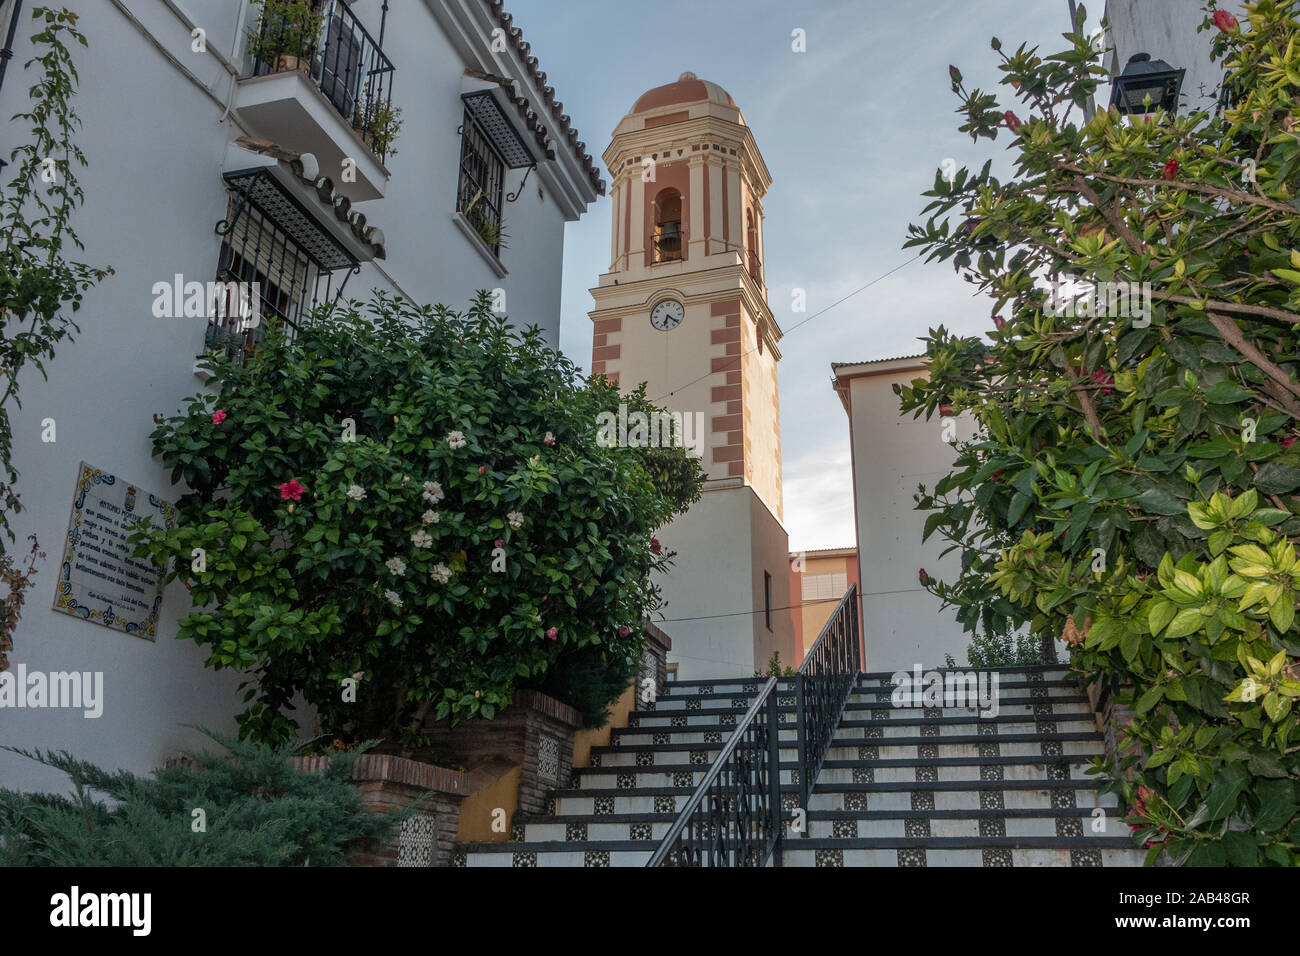 Mosaic steps leading to a church in the centre of estepona, spain Stock Photo